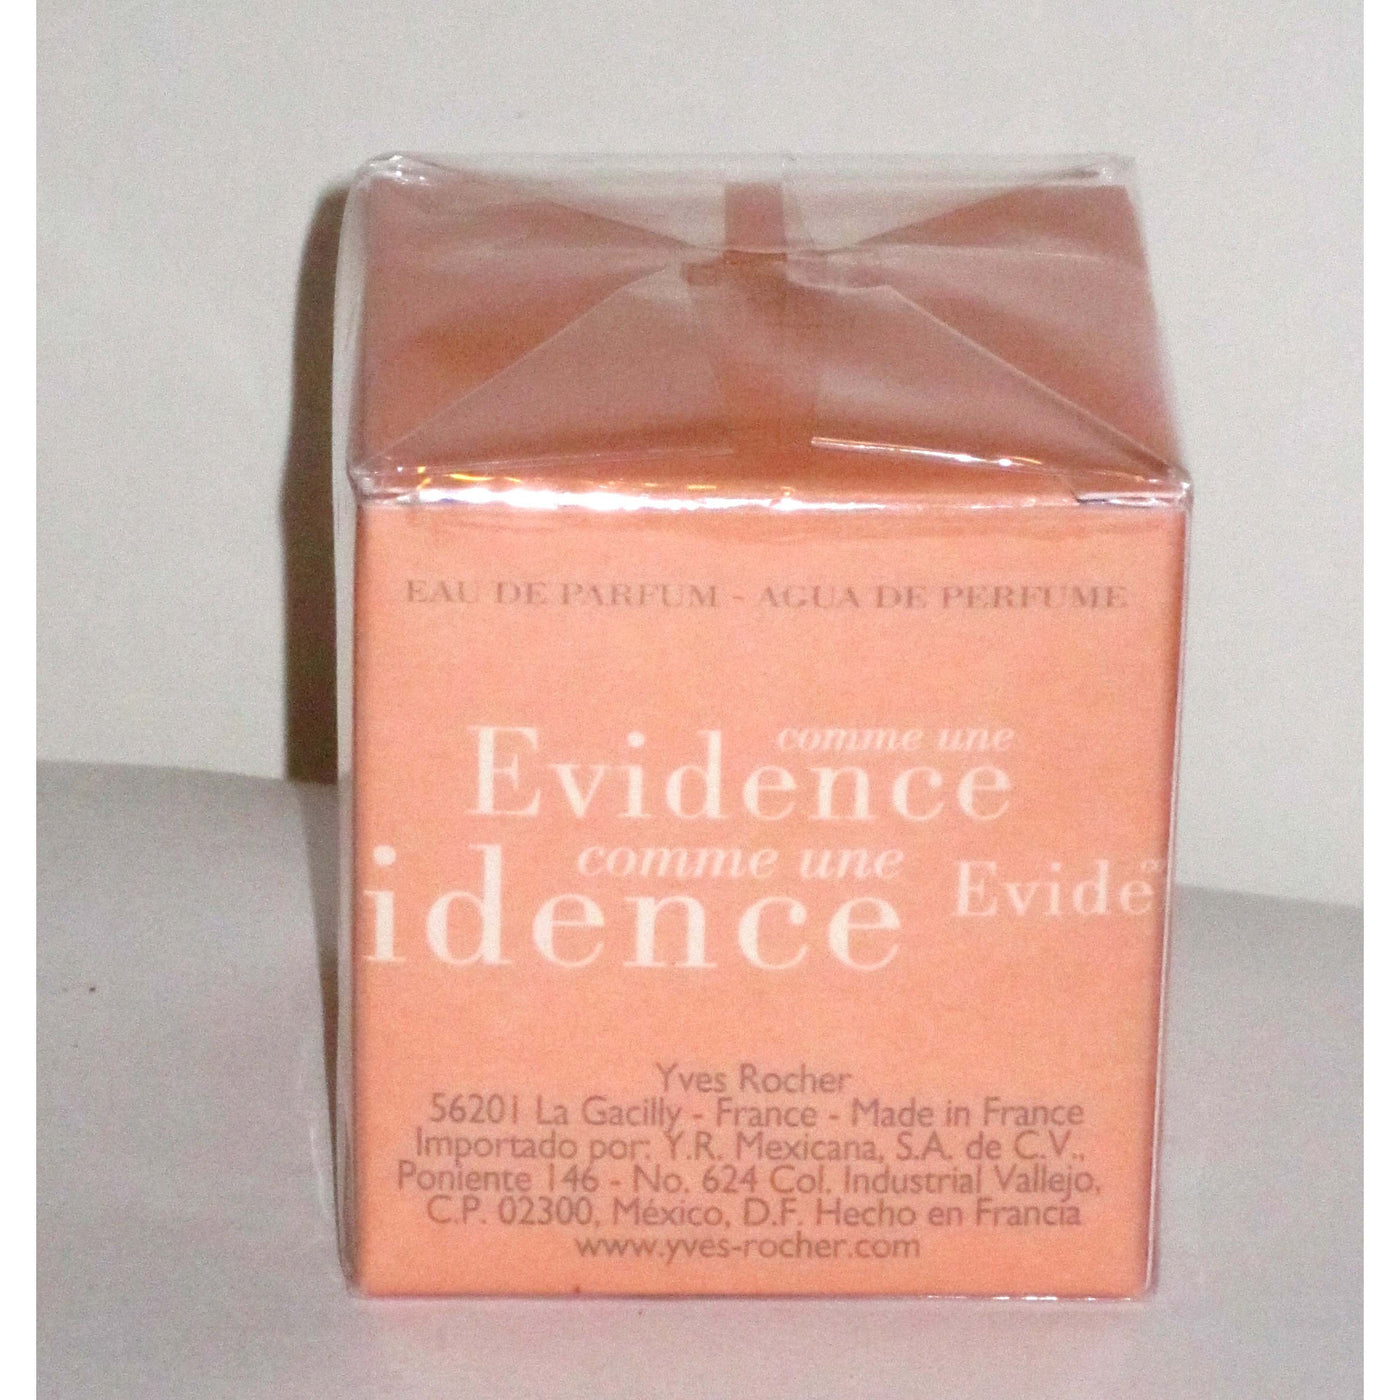 Vintage Yves Rocher Comme Une Evidence